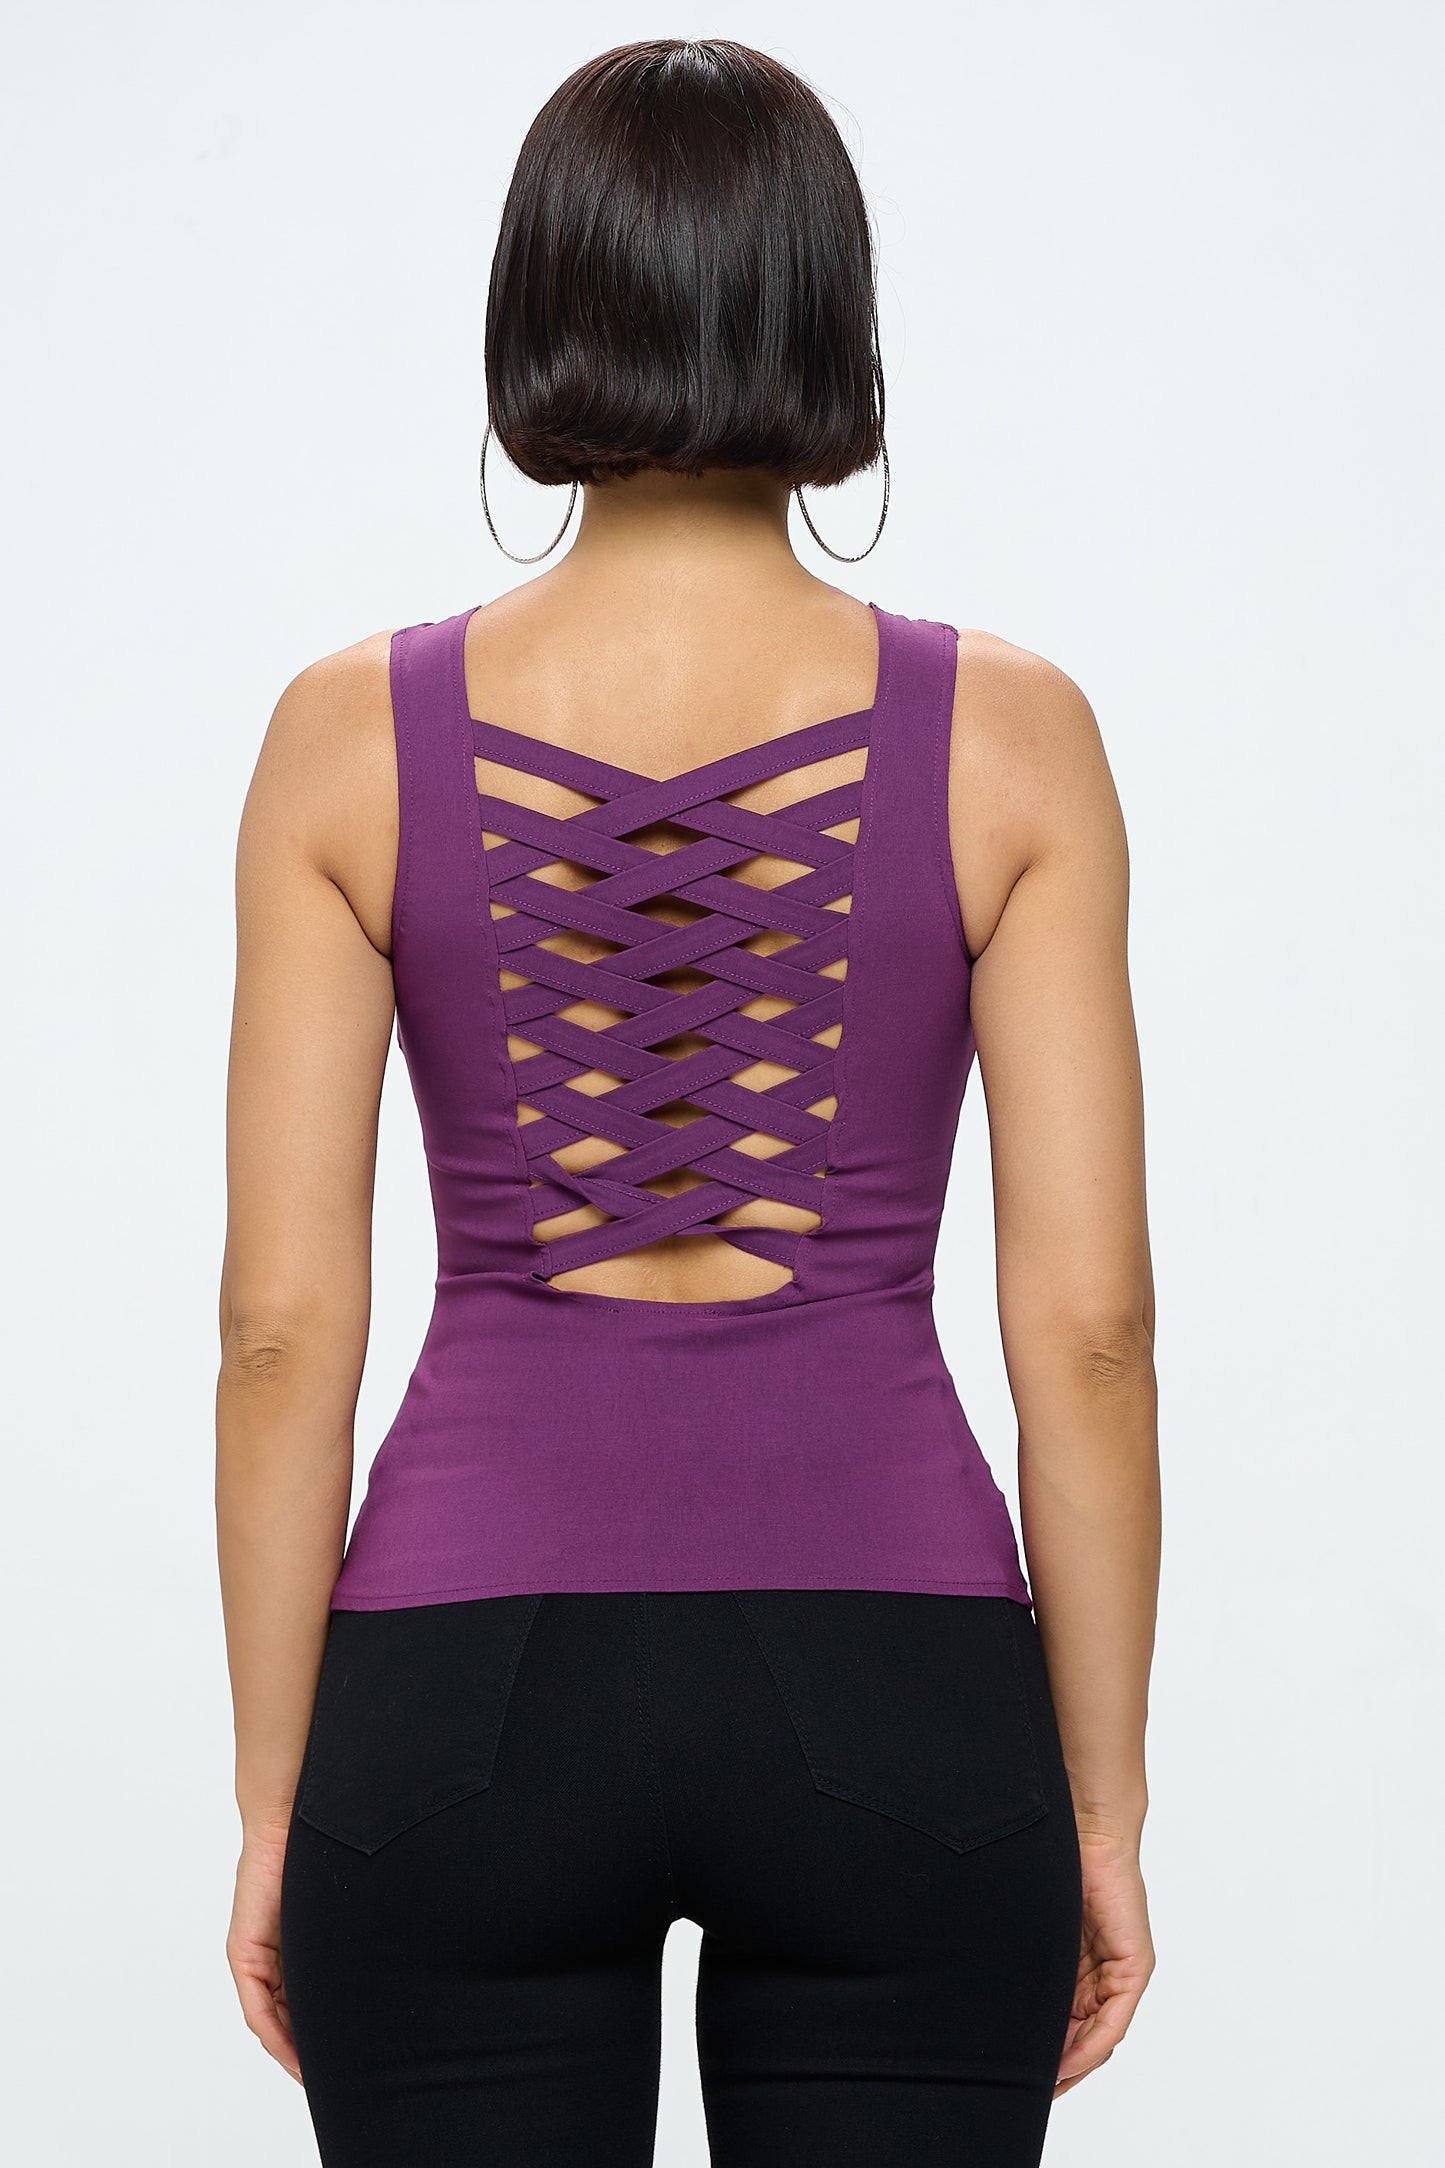 LACE-UP FRONT DETAIL CROSS HATCH BACK TANK TOP